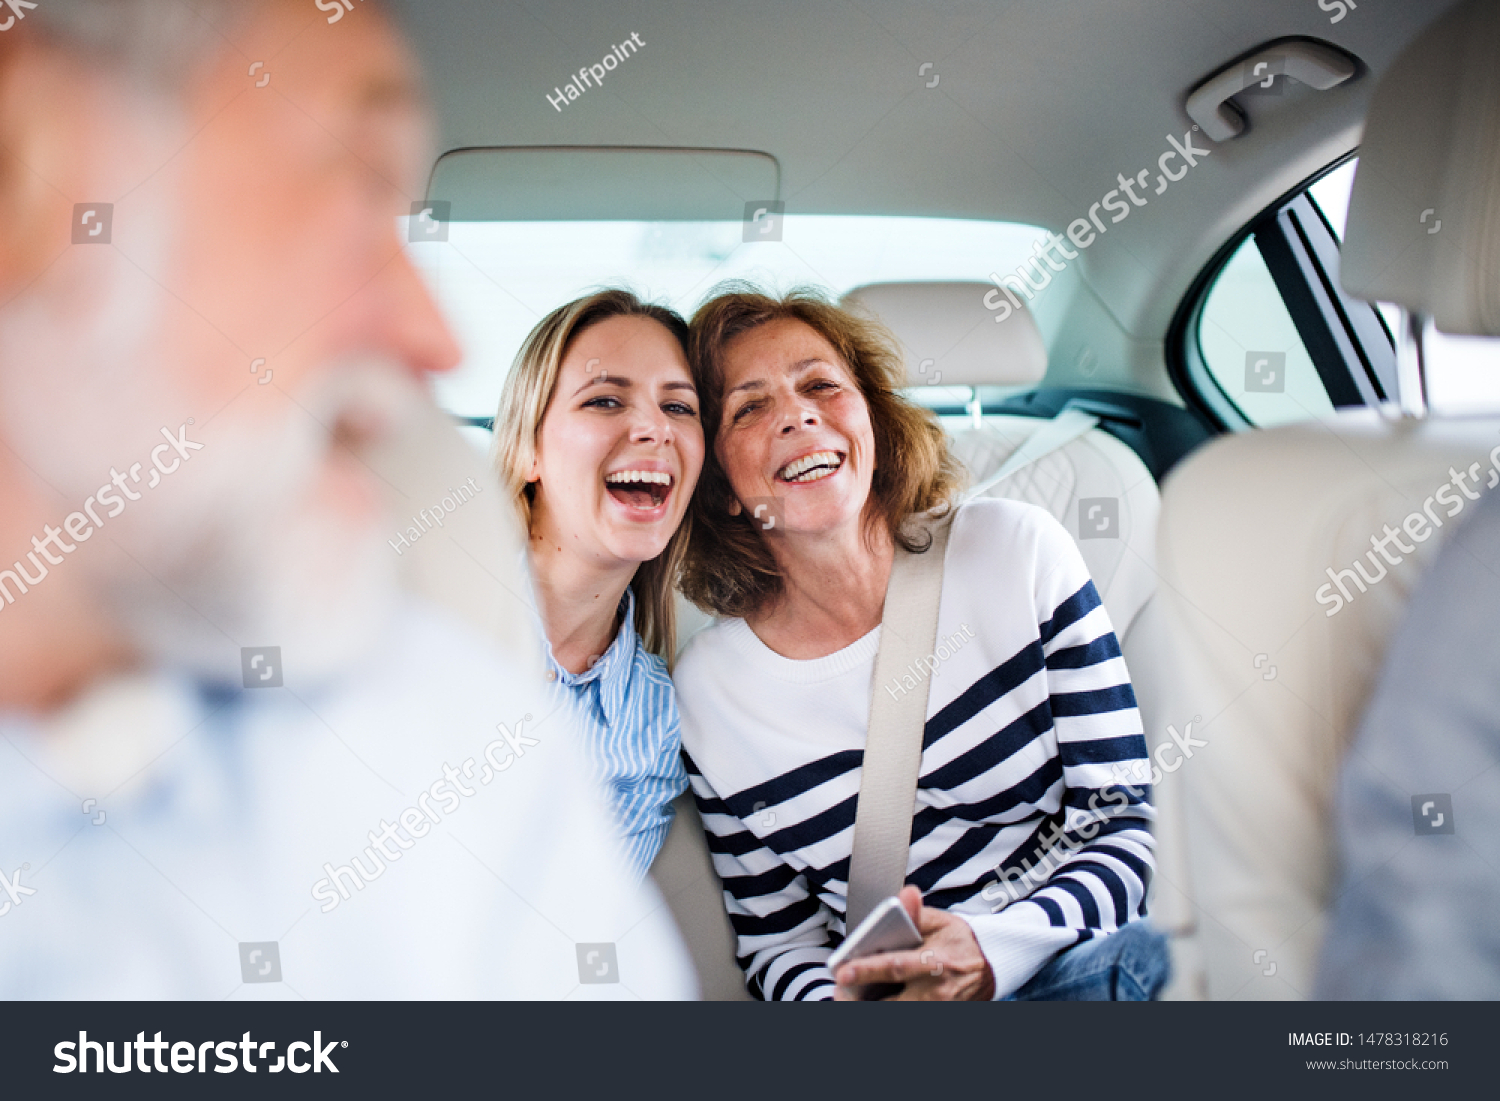 Cheerful adults sitting in car, going on a trip. #1478318216